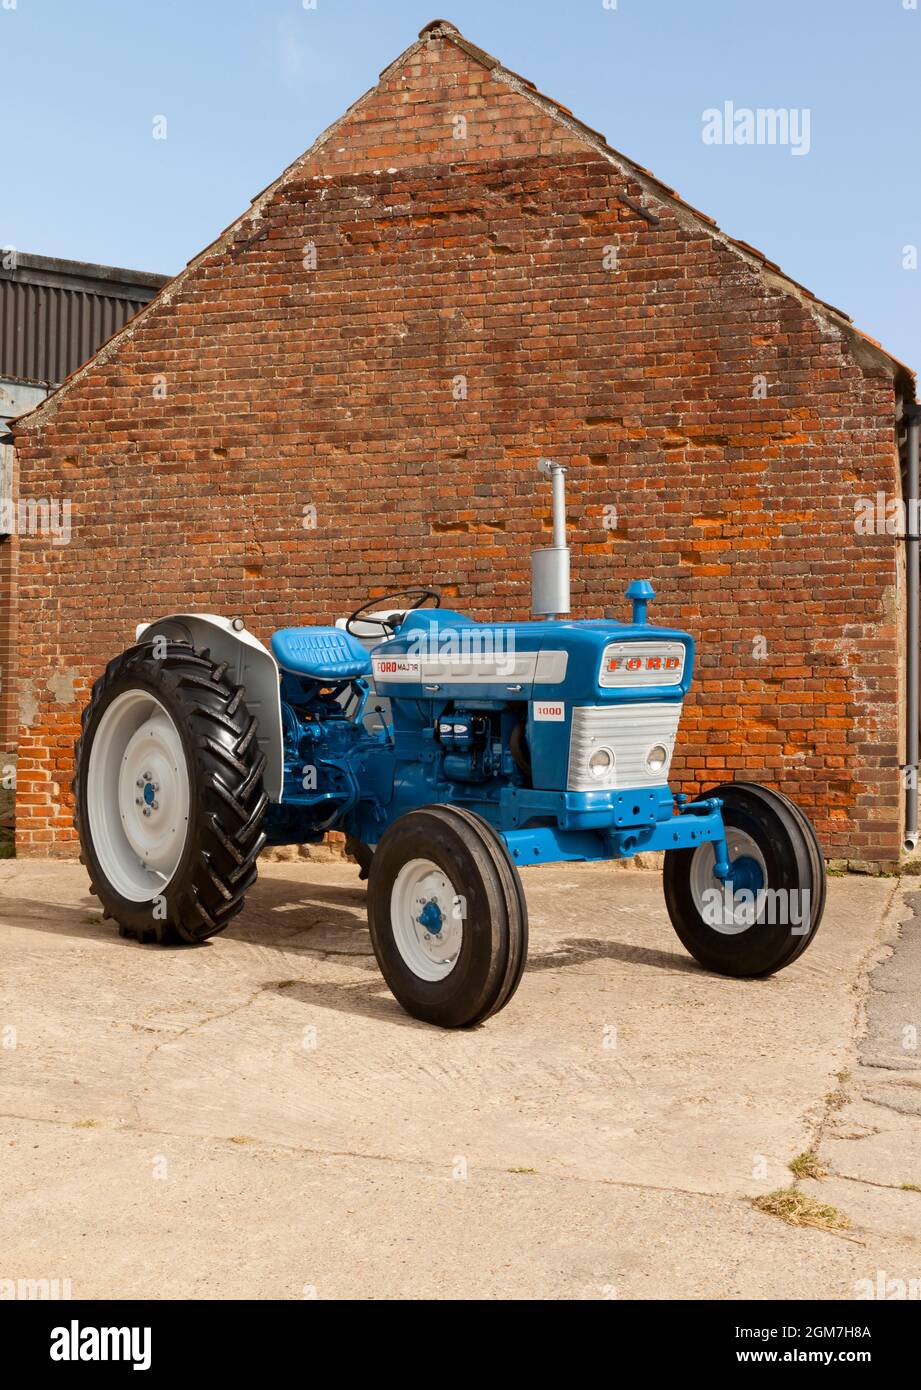 Ford 4000 Pre Force vintage tractor Stock Photo